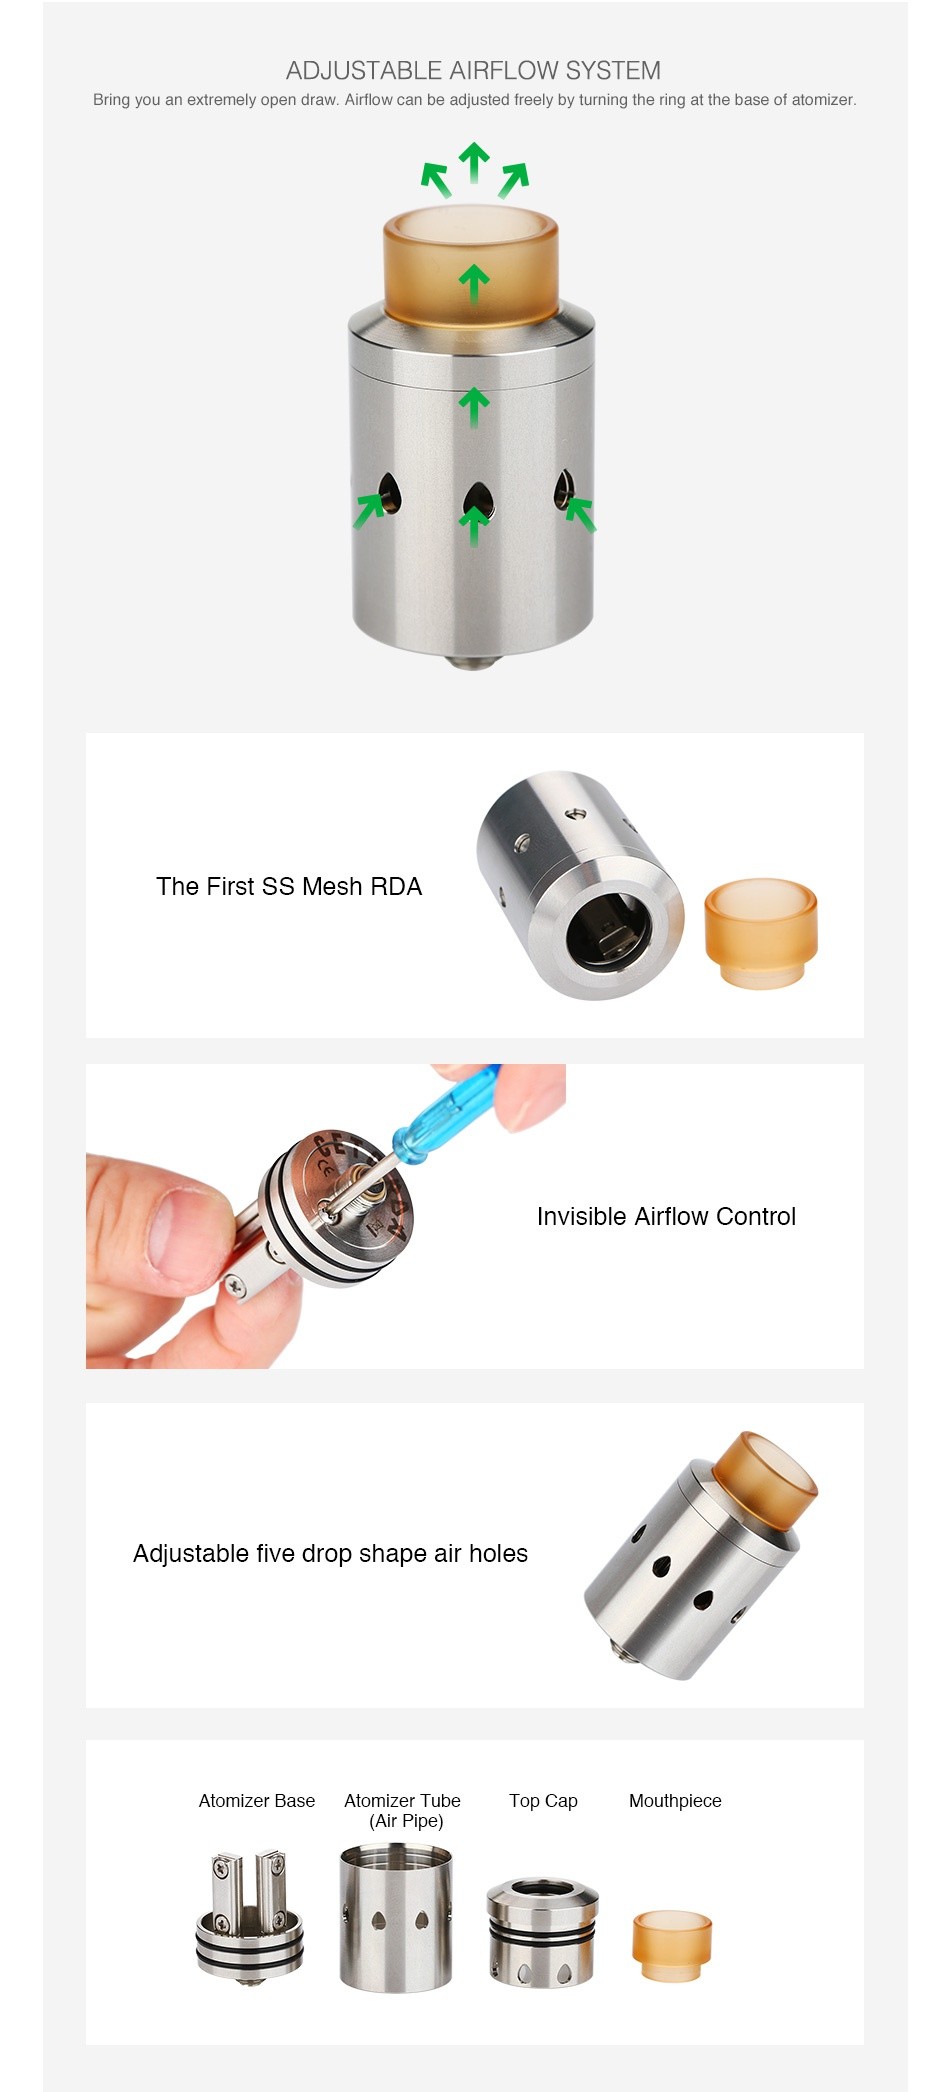 Cthulhu CETO Mesh RDA ADJUSTABLE AIRFLOW SYSTEM Bring you an extremely open draw  Airflow can be adjusted freely by turning the ring at the base of atomizer    The first ss mesh rda Invisible airflow contro Adjustable five drop shape air holes Atomizer Base Atomizer Tube Top Cap Mouthpiece  Air Pipe